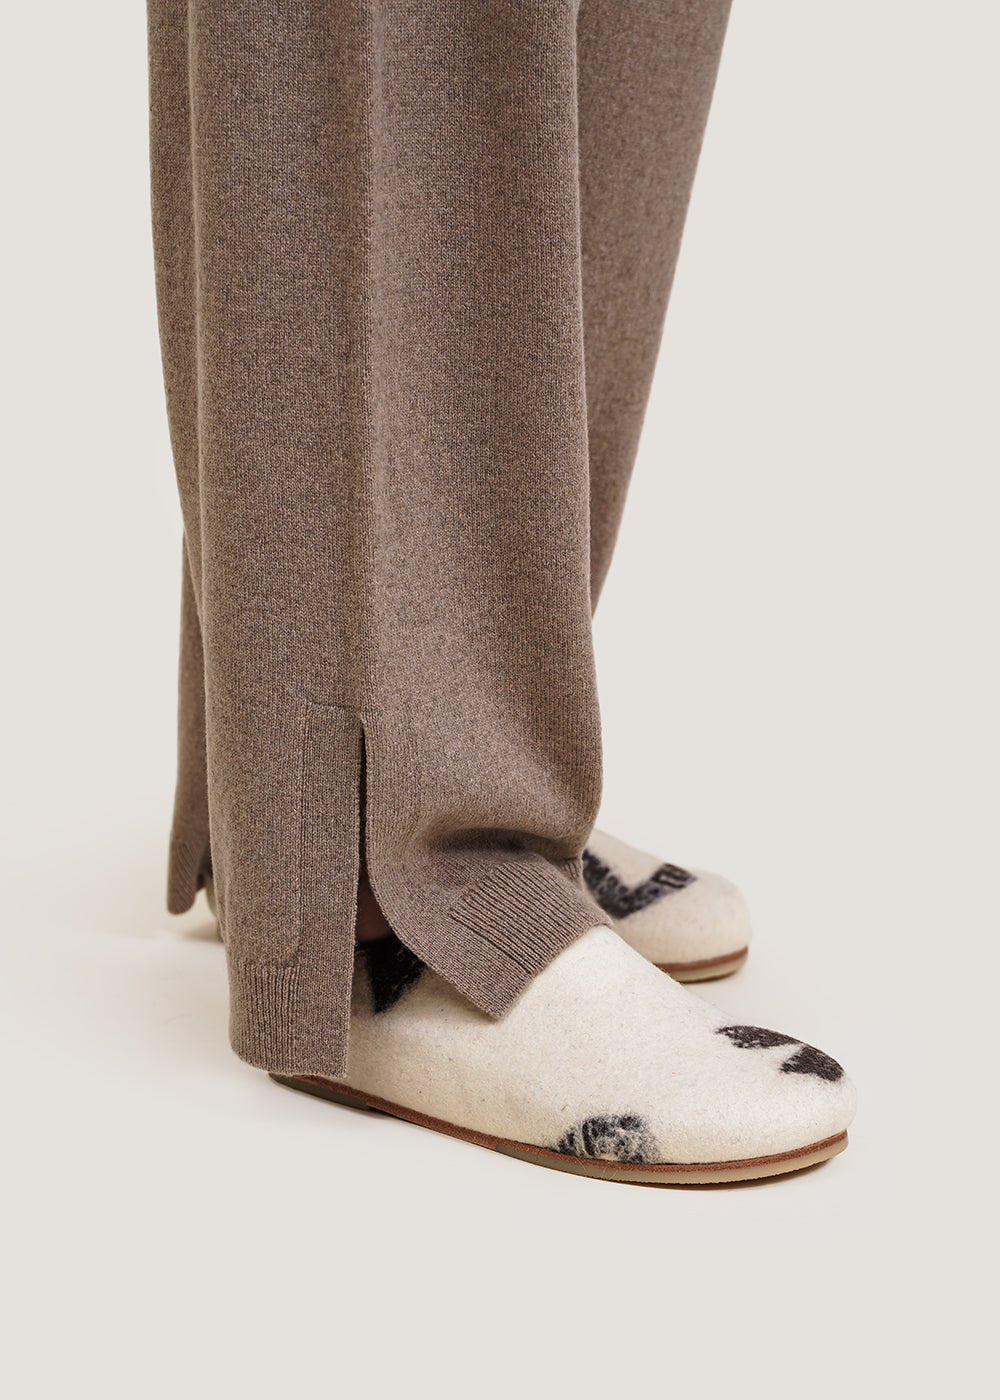 Cordera Taupe Cashmere Knit Pants - New Classics Studios Sustainable Ethical Fashion Canada